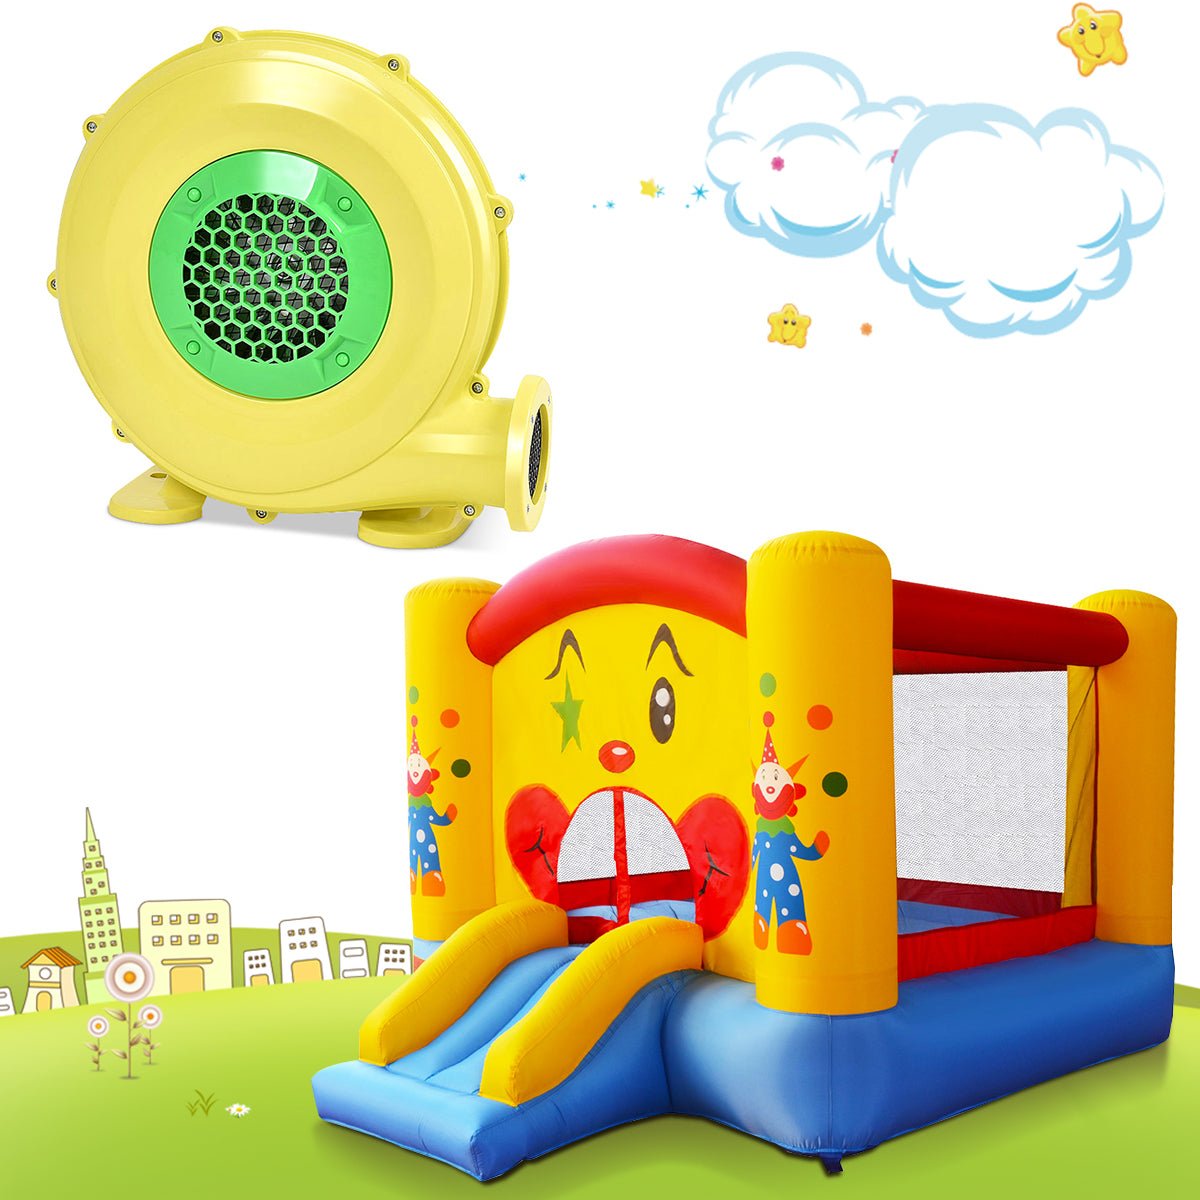 Airy Excitement Awaits - 680W Electric Air Fan Blower for Bounce Houses